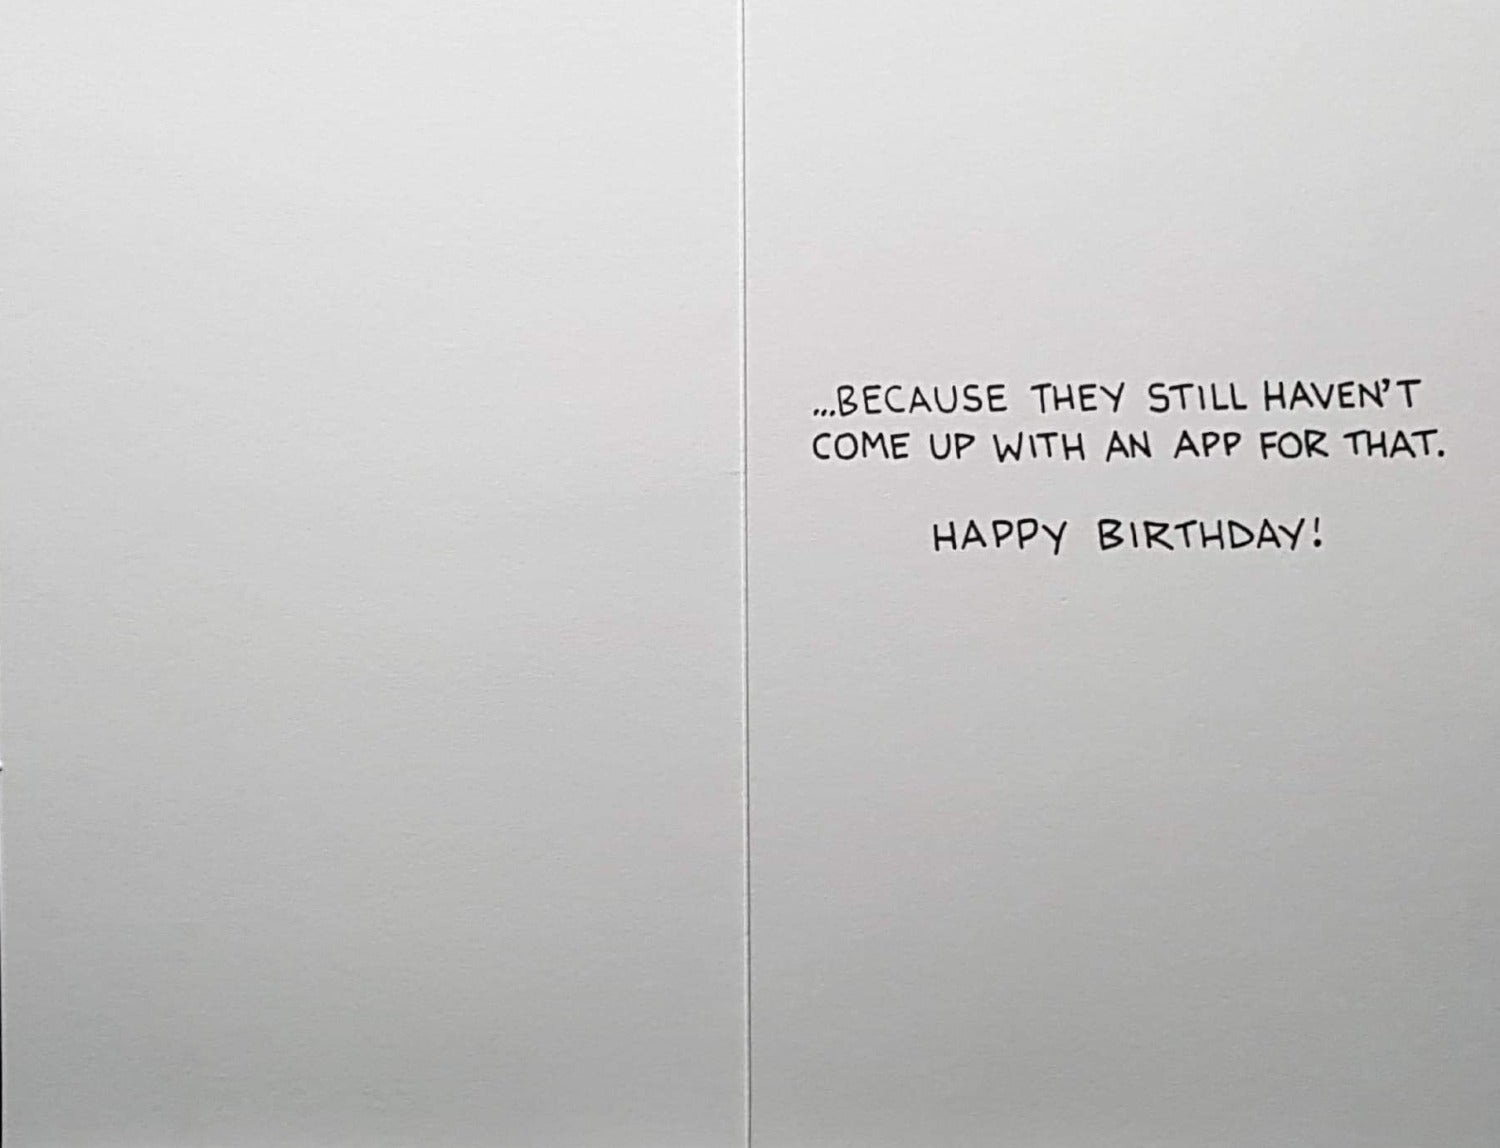 Birthday Card - Son / 'Blow Out Your Own Candles'